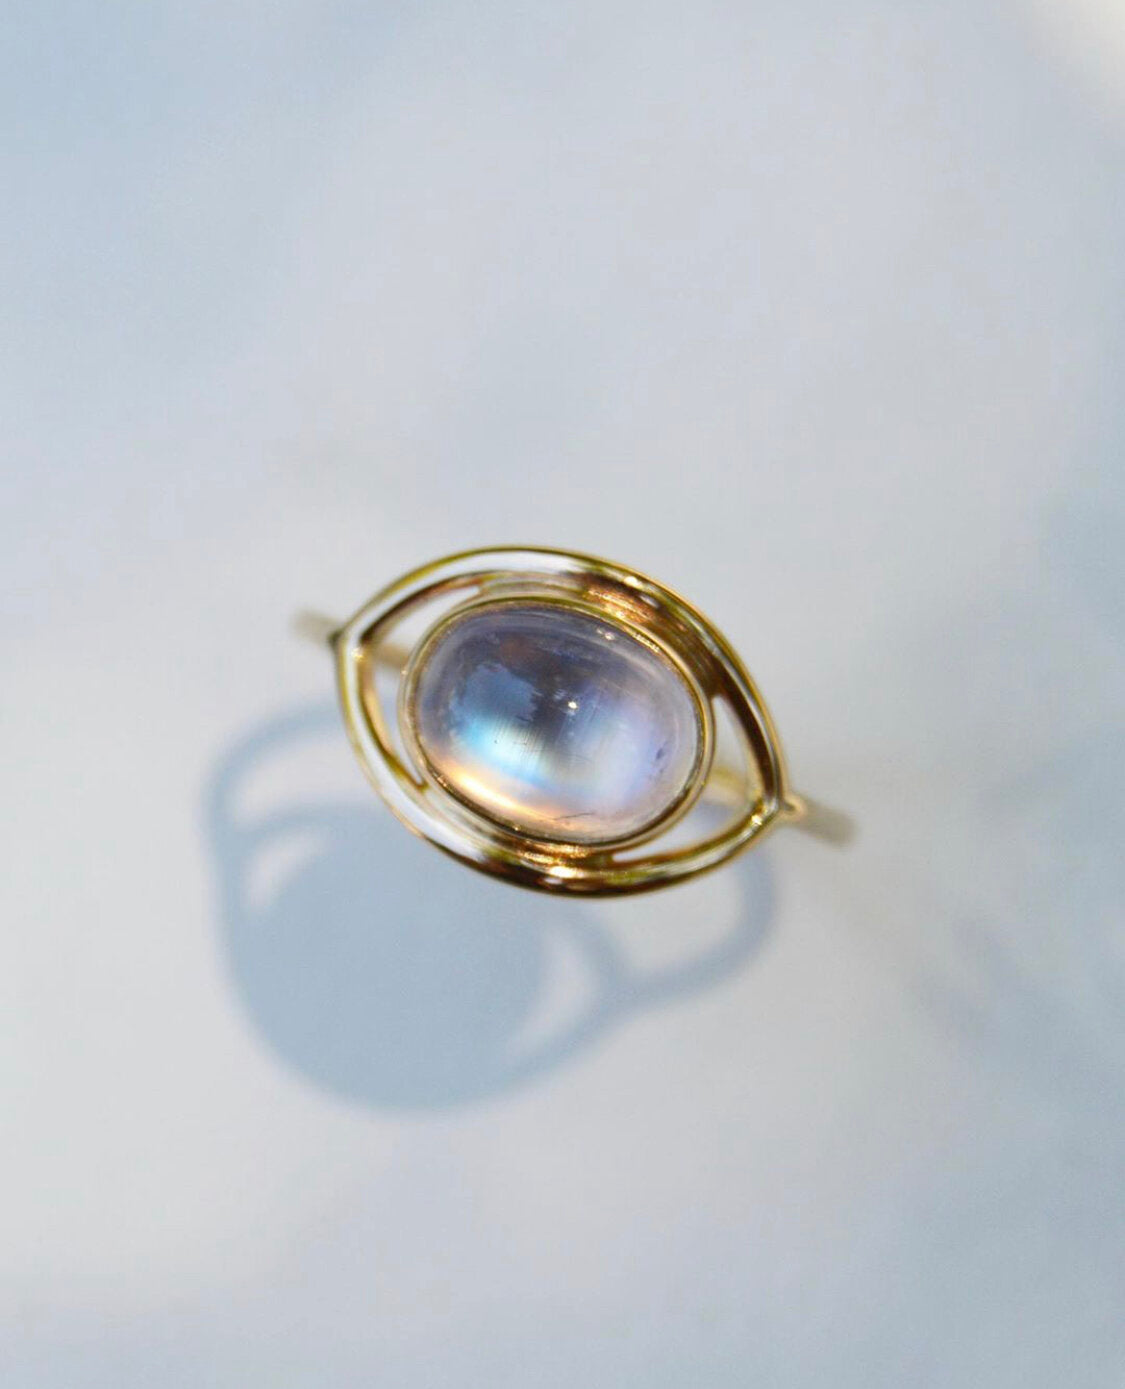 Made by hand in Northern New Mexico using recycled metals and responsibly sourced stones, this timeless, heirloom piece is sure to make a statement. This ring features a 14kt yellow gold 1.5 mm band with a moonstone cabochon.